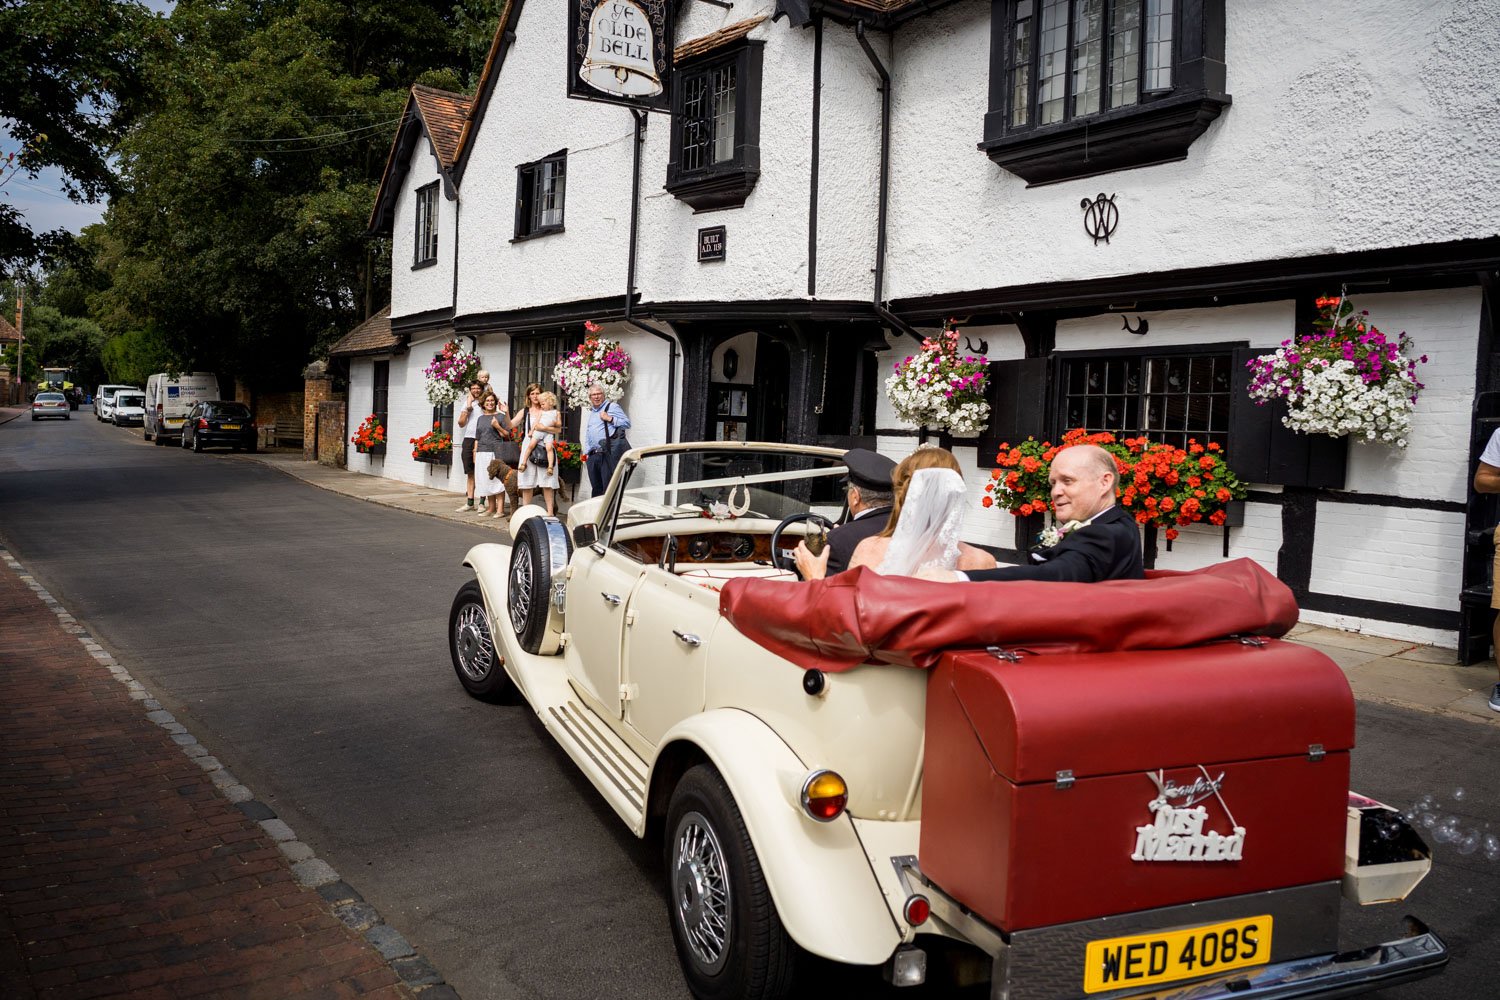 Married couple leave a wedding at The Olde Bell in a vintage car